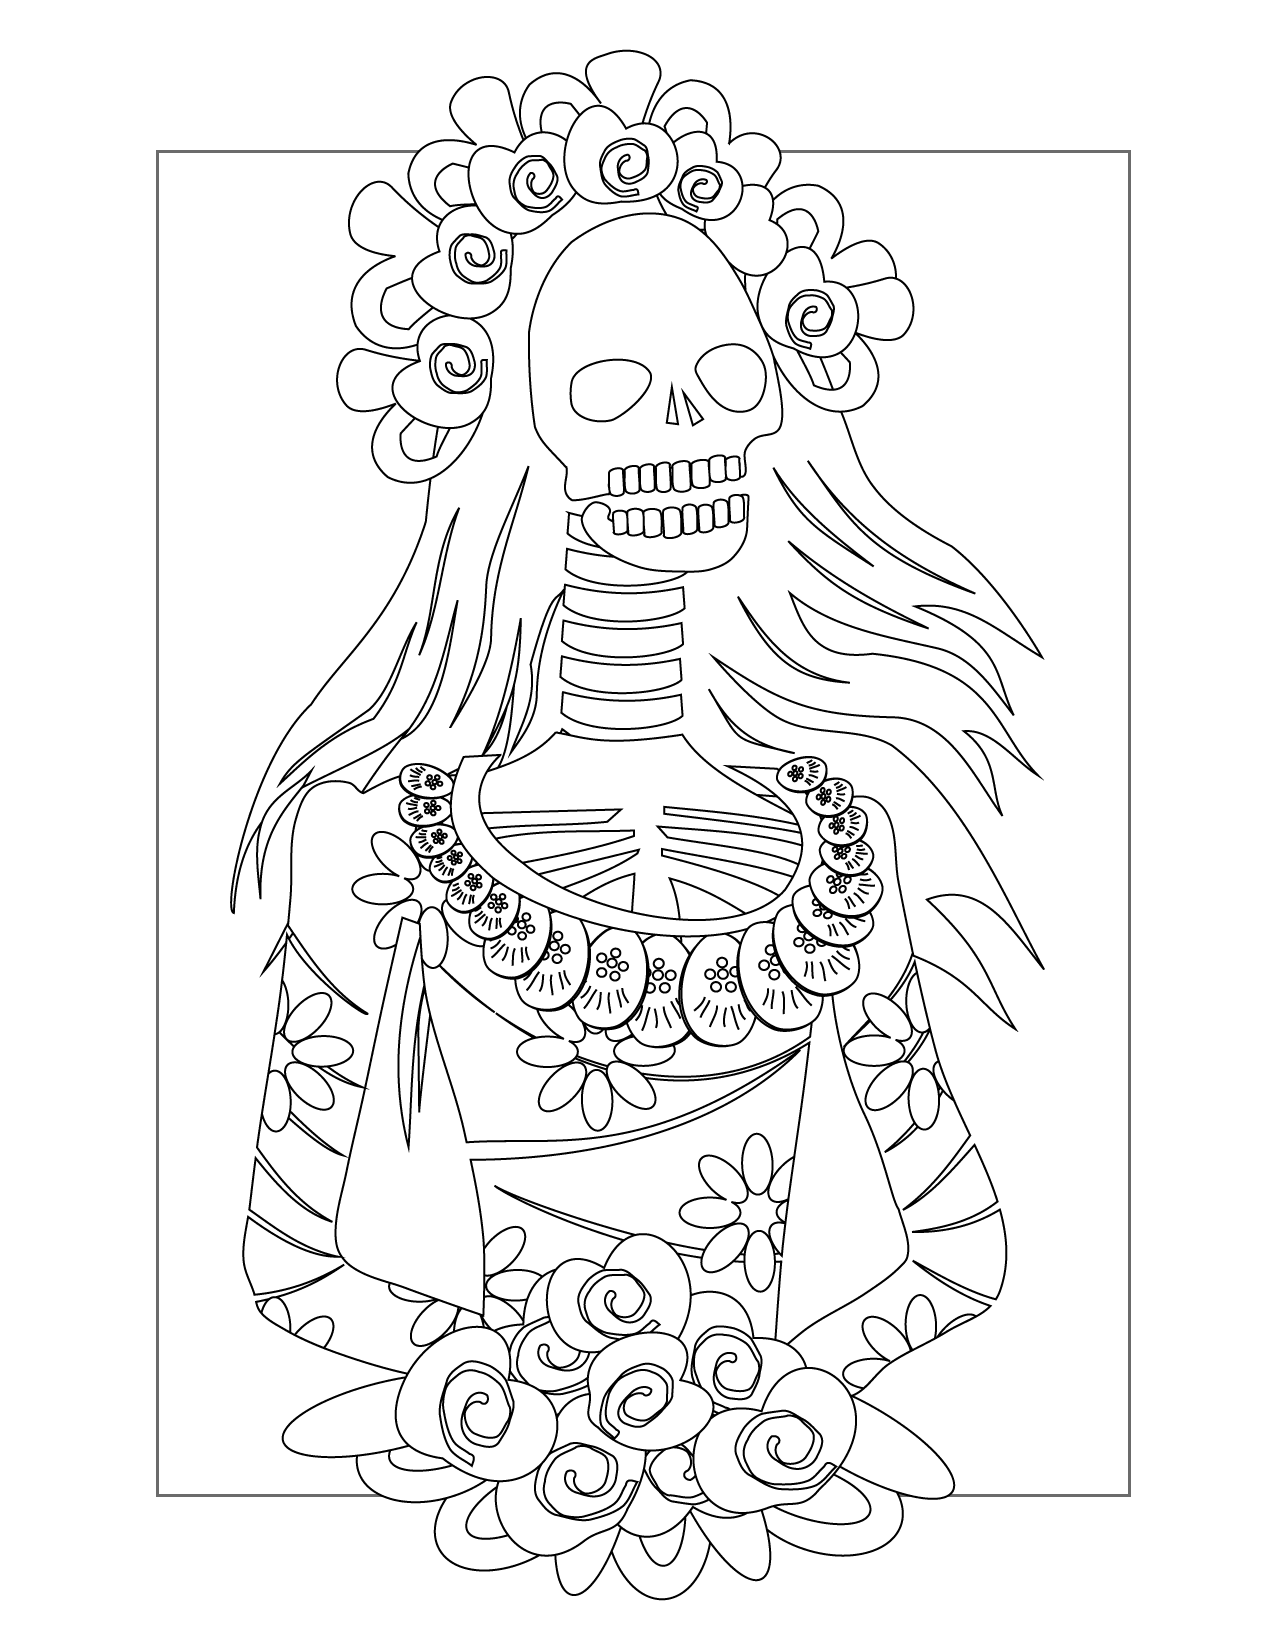 Pretty Skeleton With Flowers Coloring Page